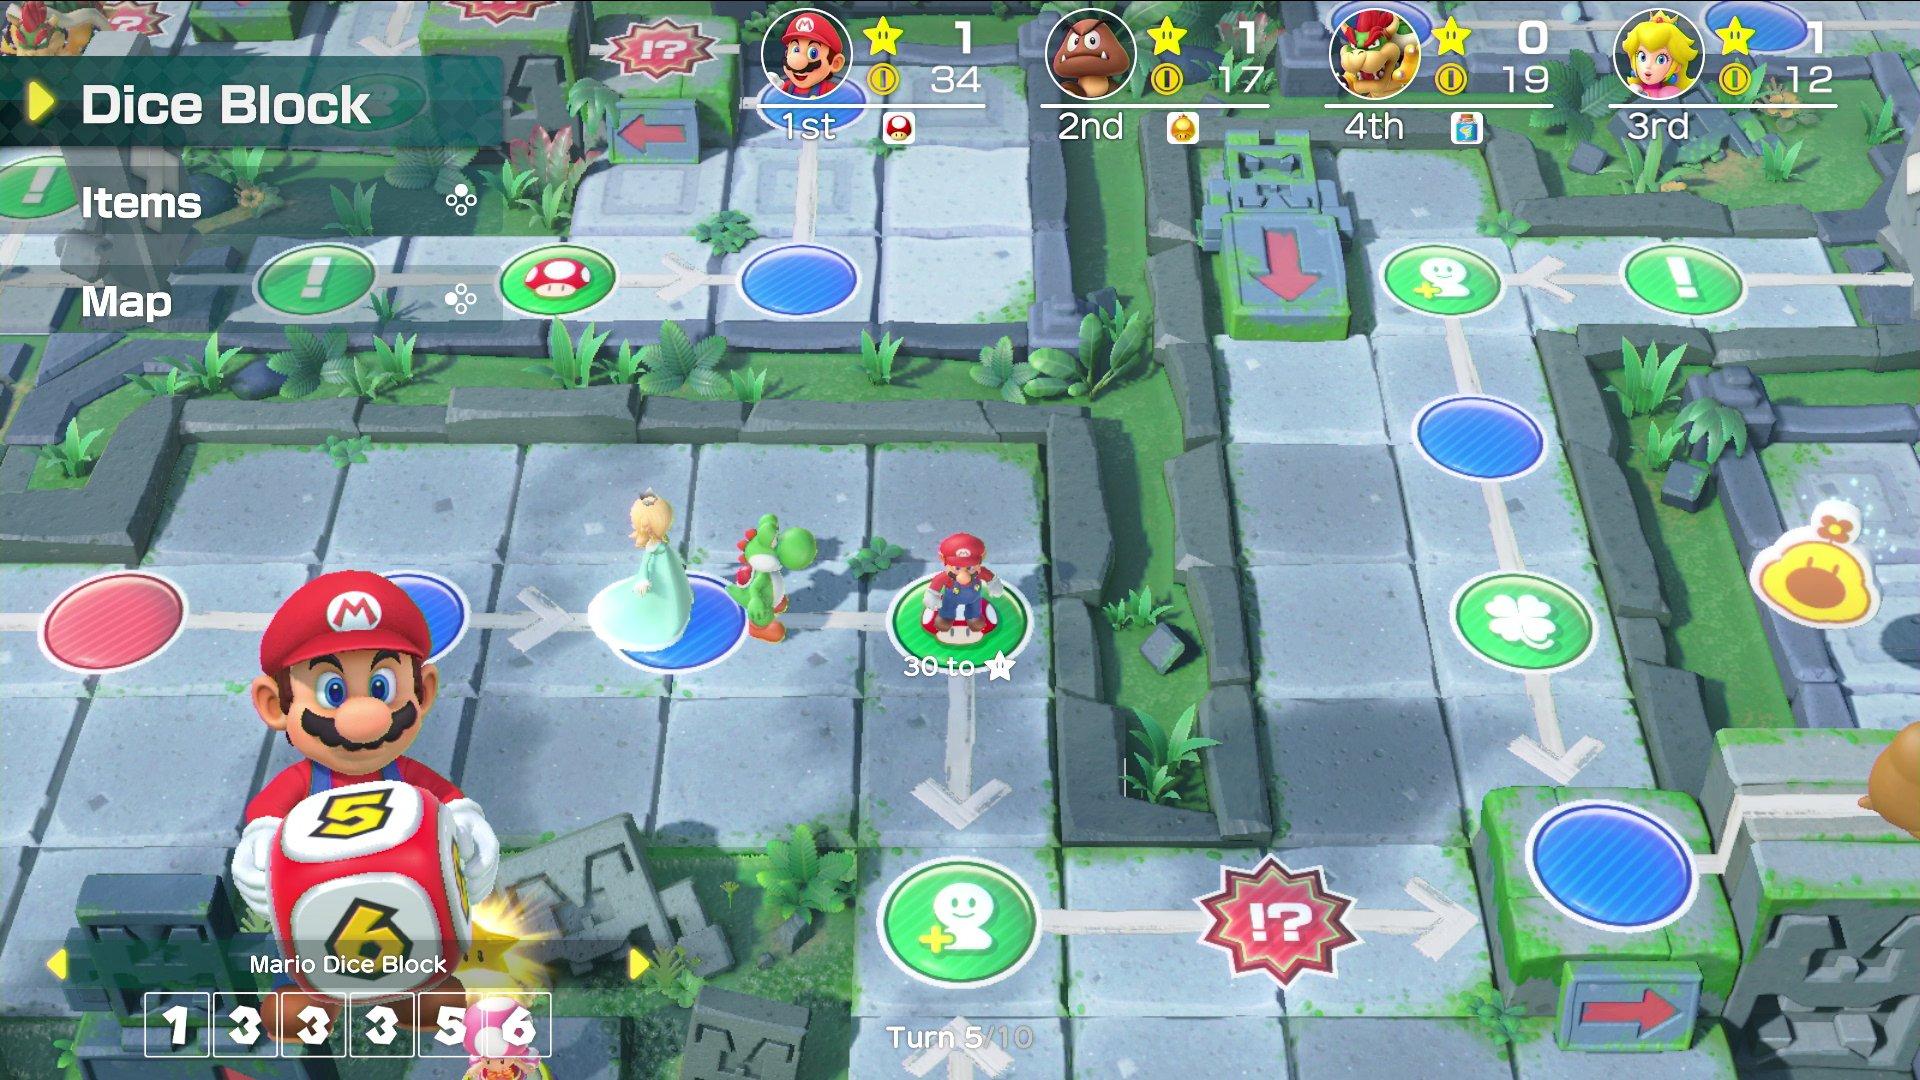 The official home of Super Mario™ – News - Free update for Super Mario Party!  Online play comes to the board game mode